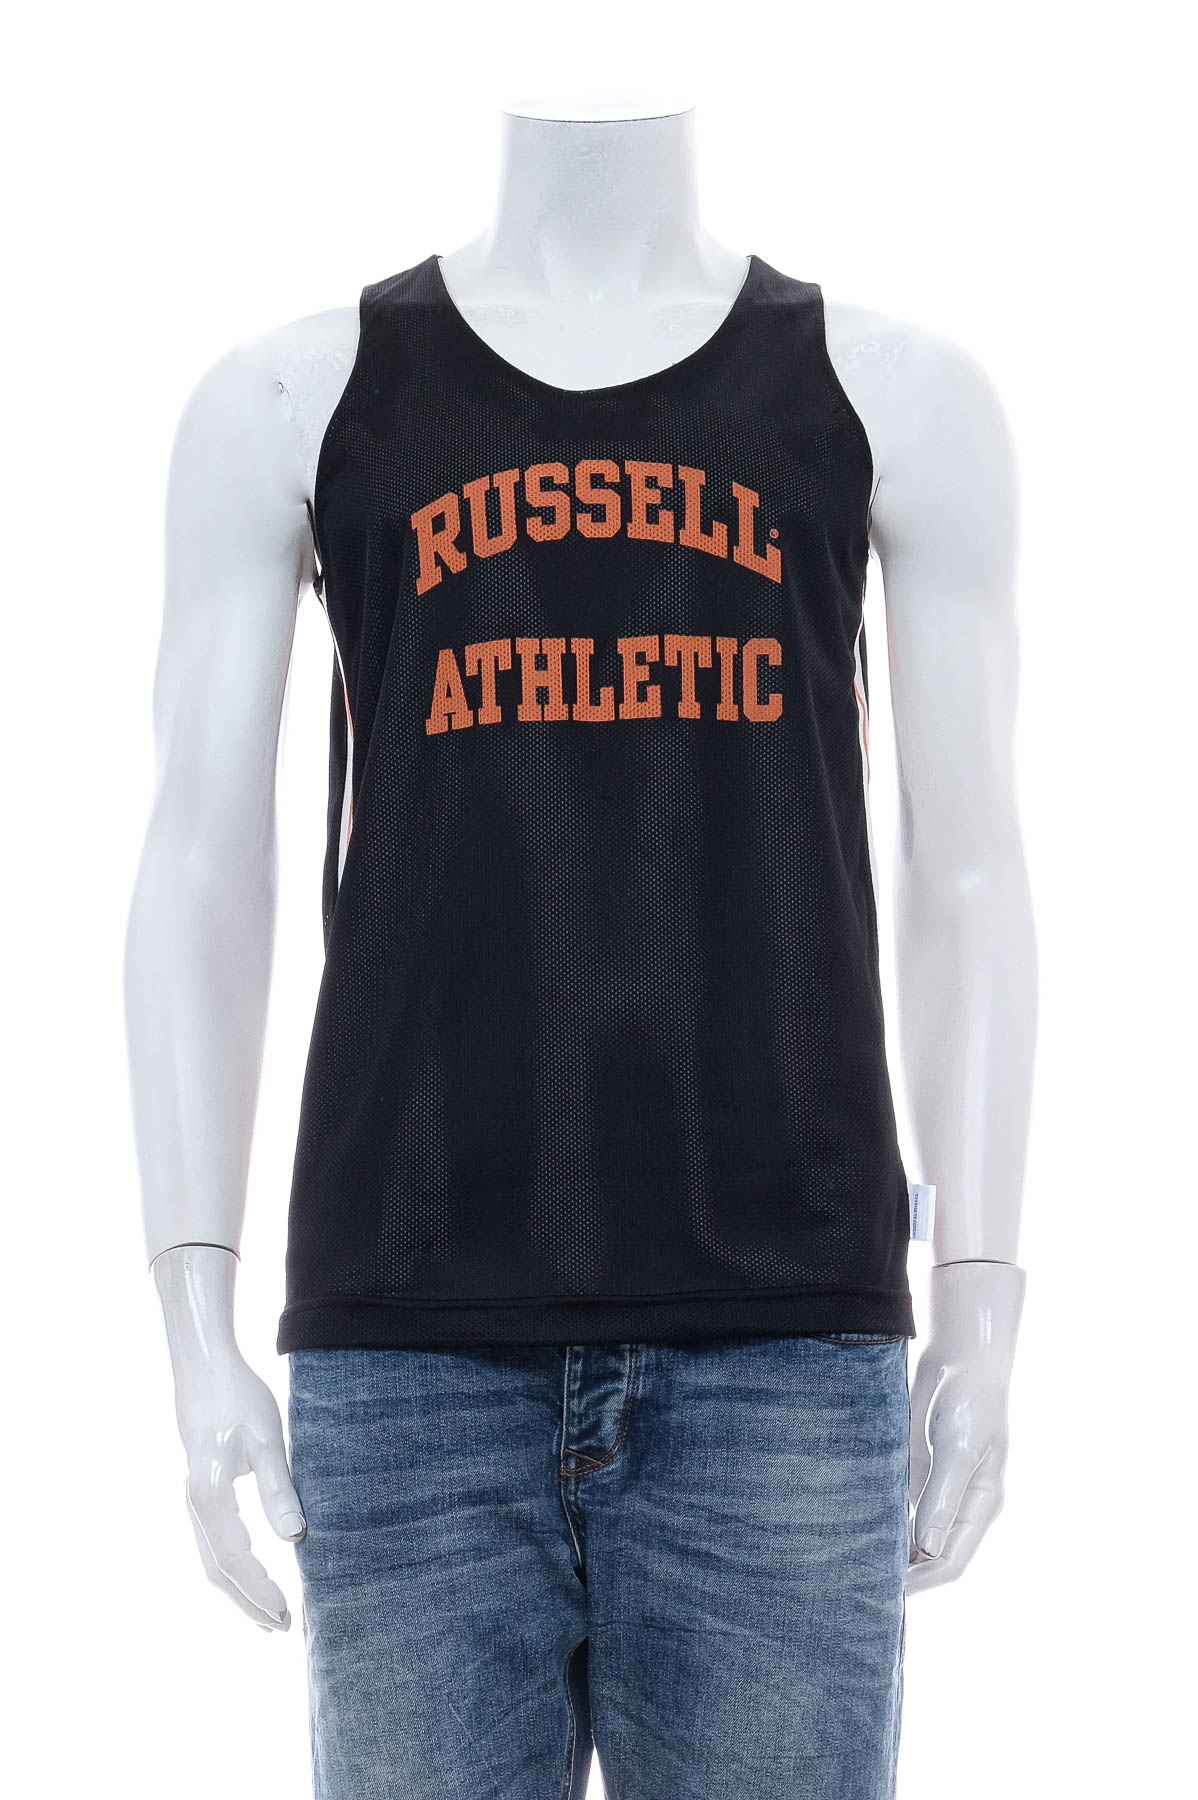 Boy's top reversible - Russell Athletic - 1